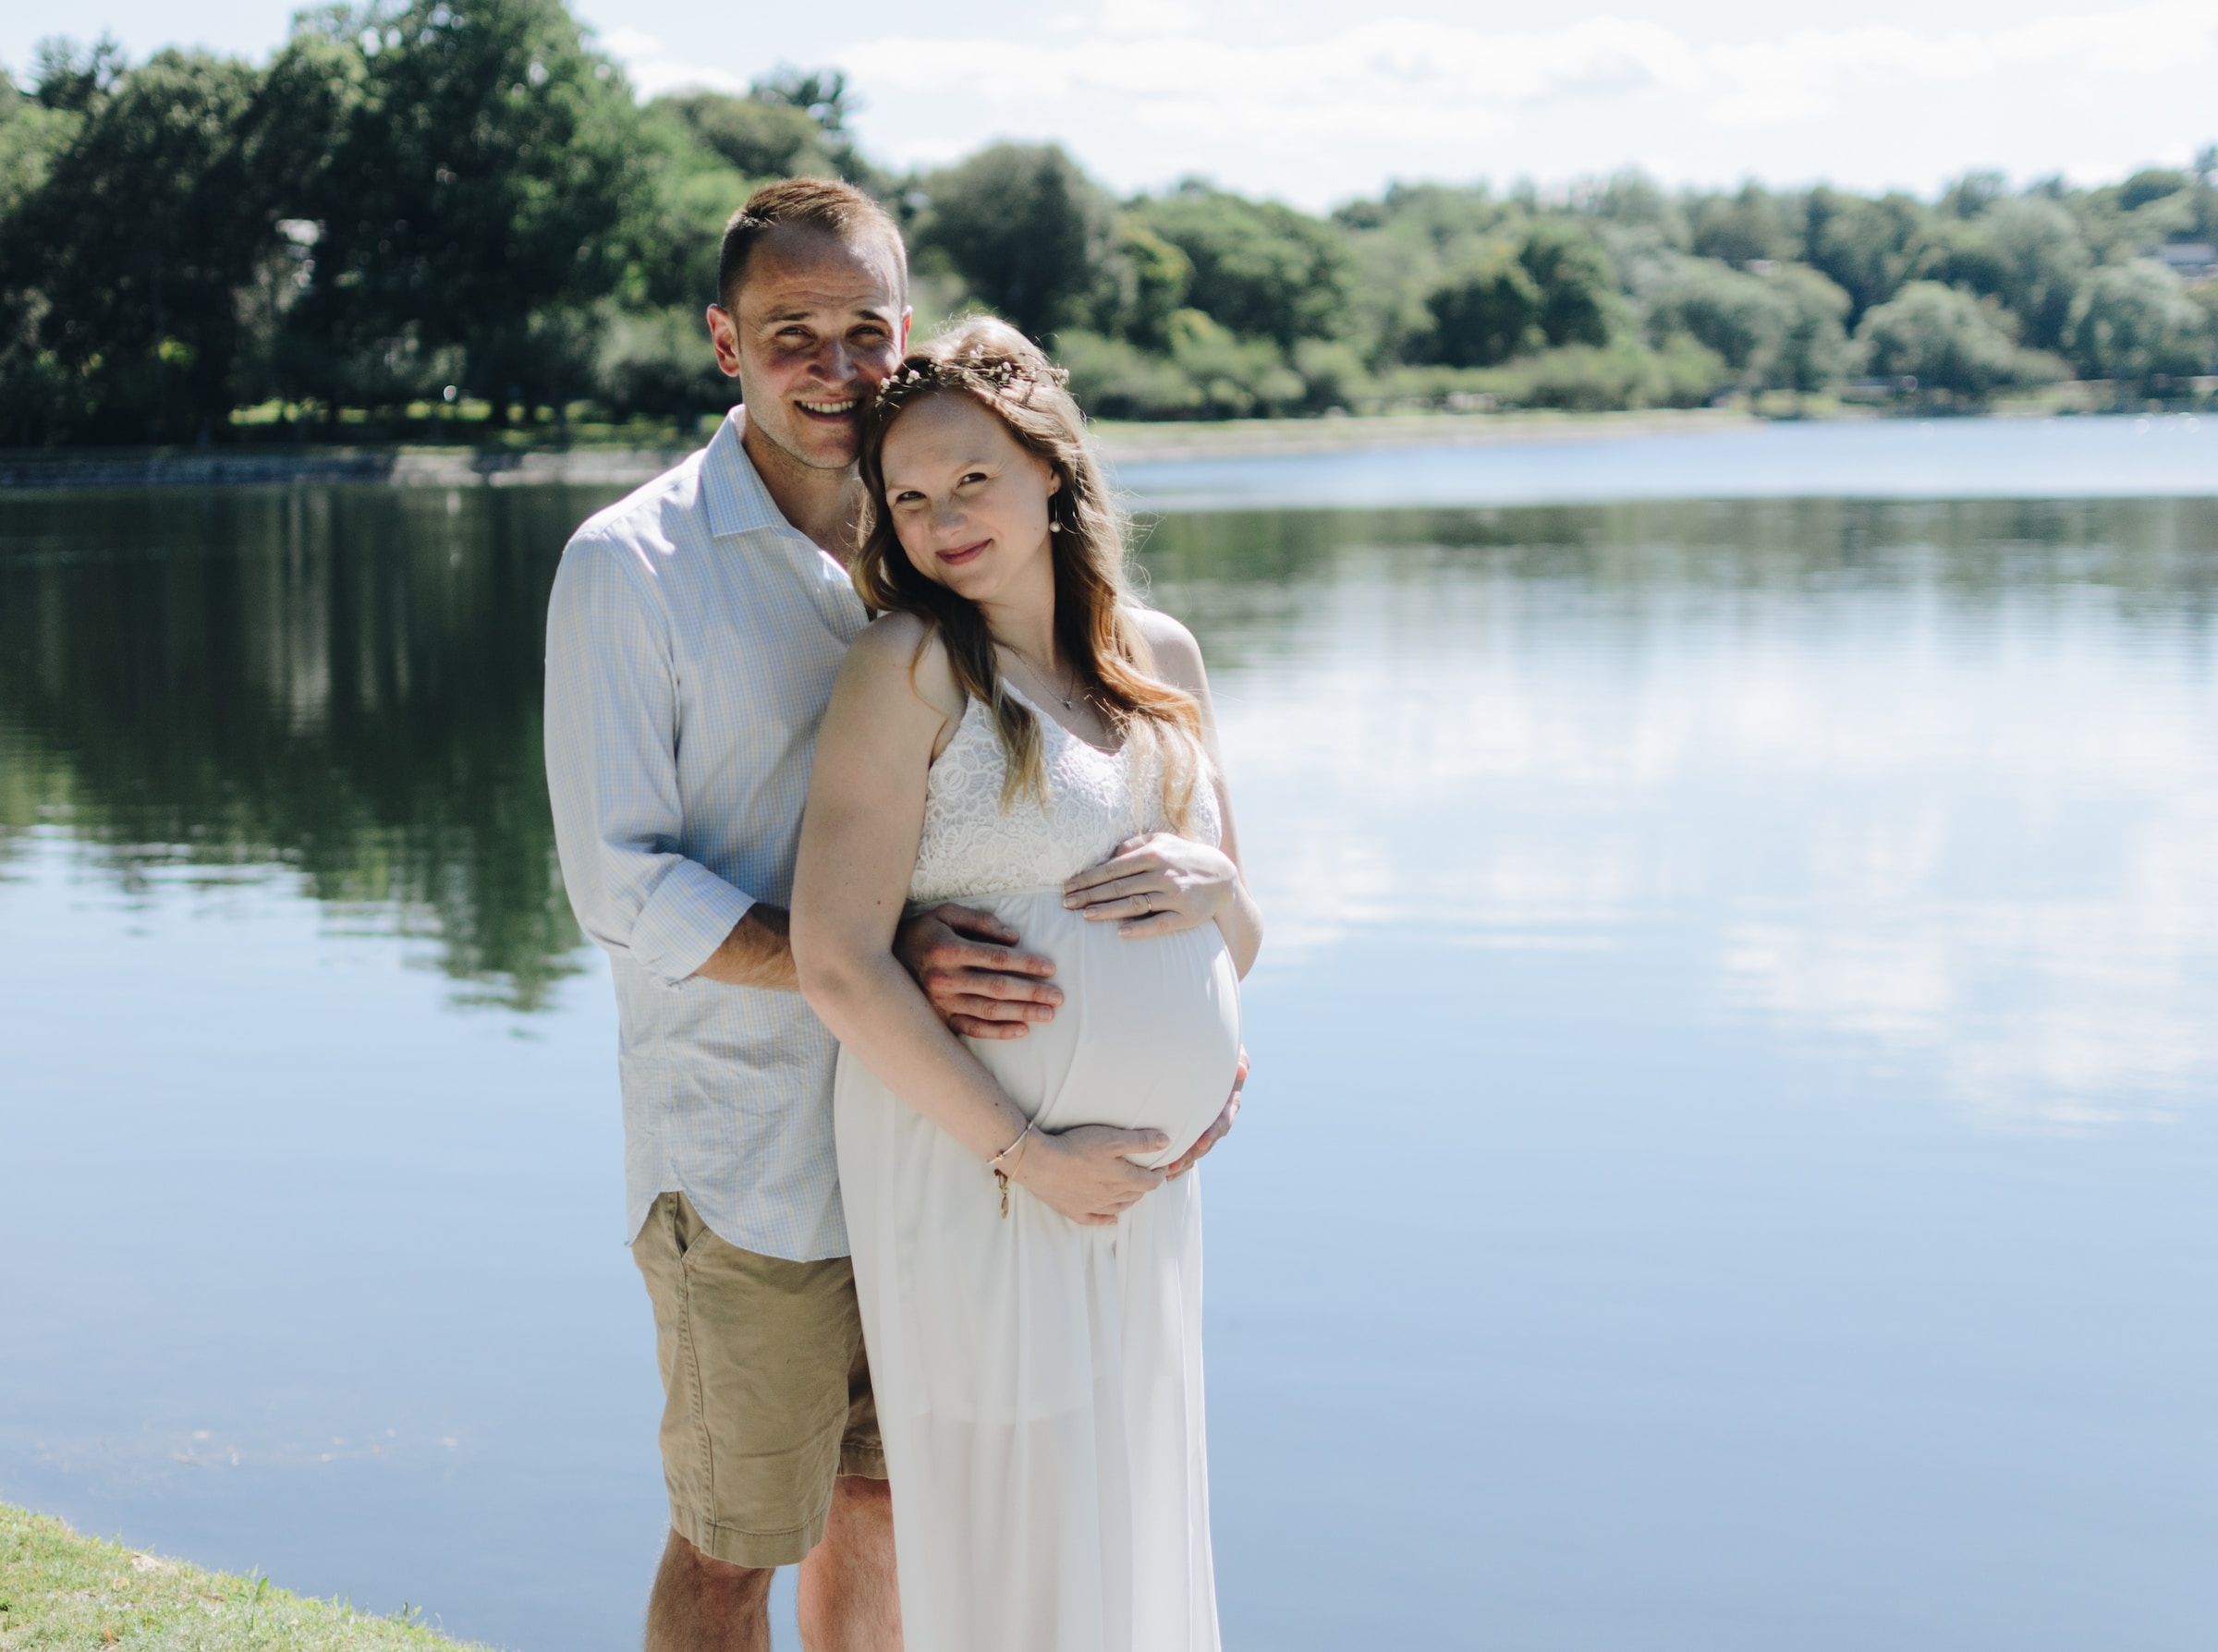 A man with his pregnant wife | Source: Unsplash